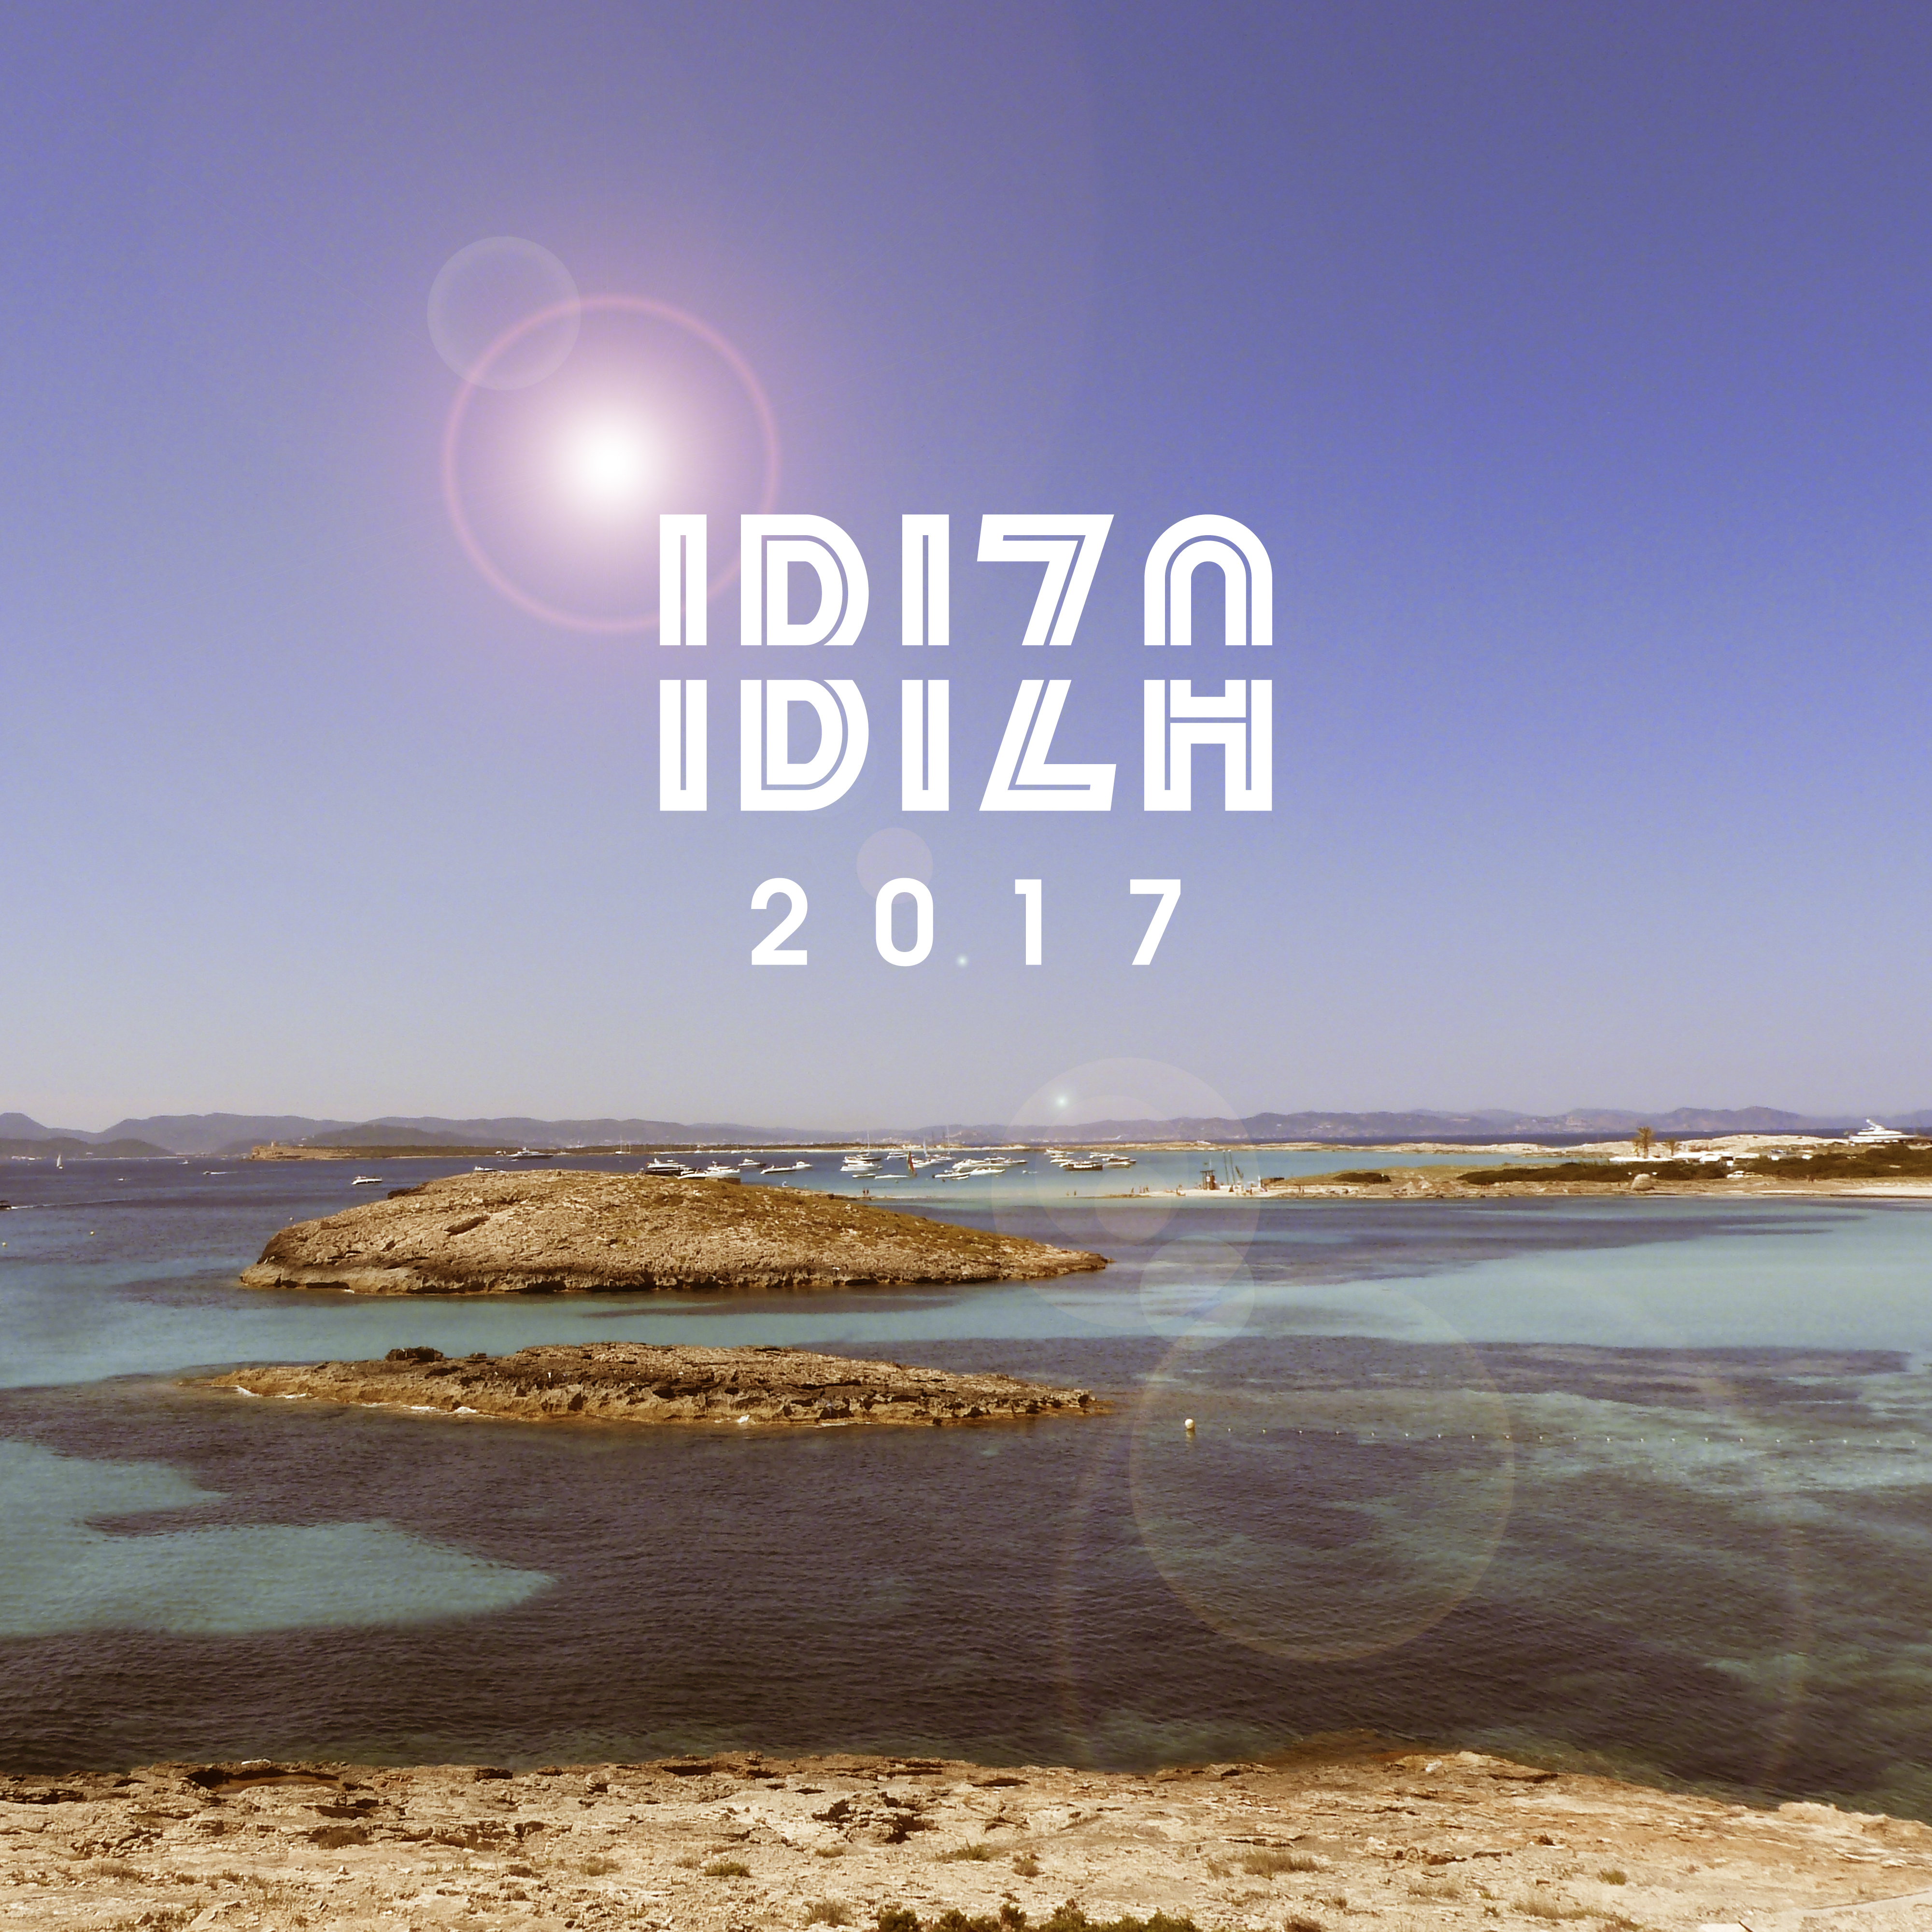 Ibiza 2017  Chill Out 69, Summer Love,  Vibes, Palma de Lounge, Chill Paradise,  on the Beach